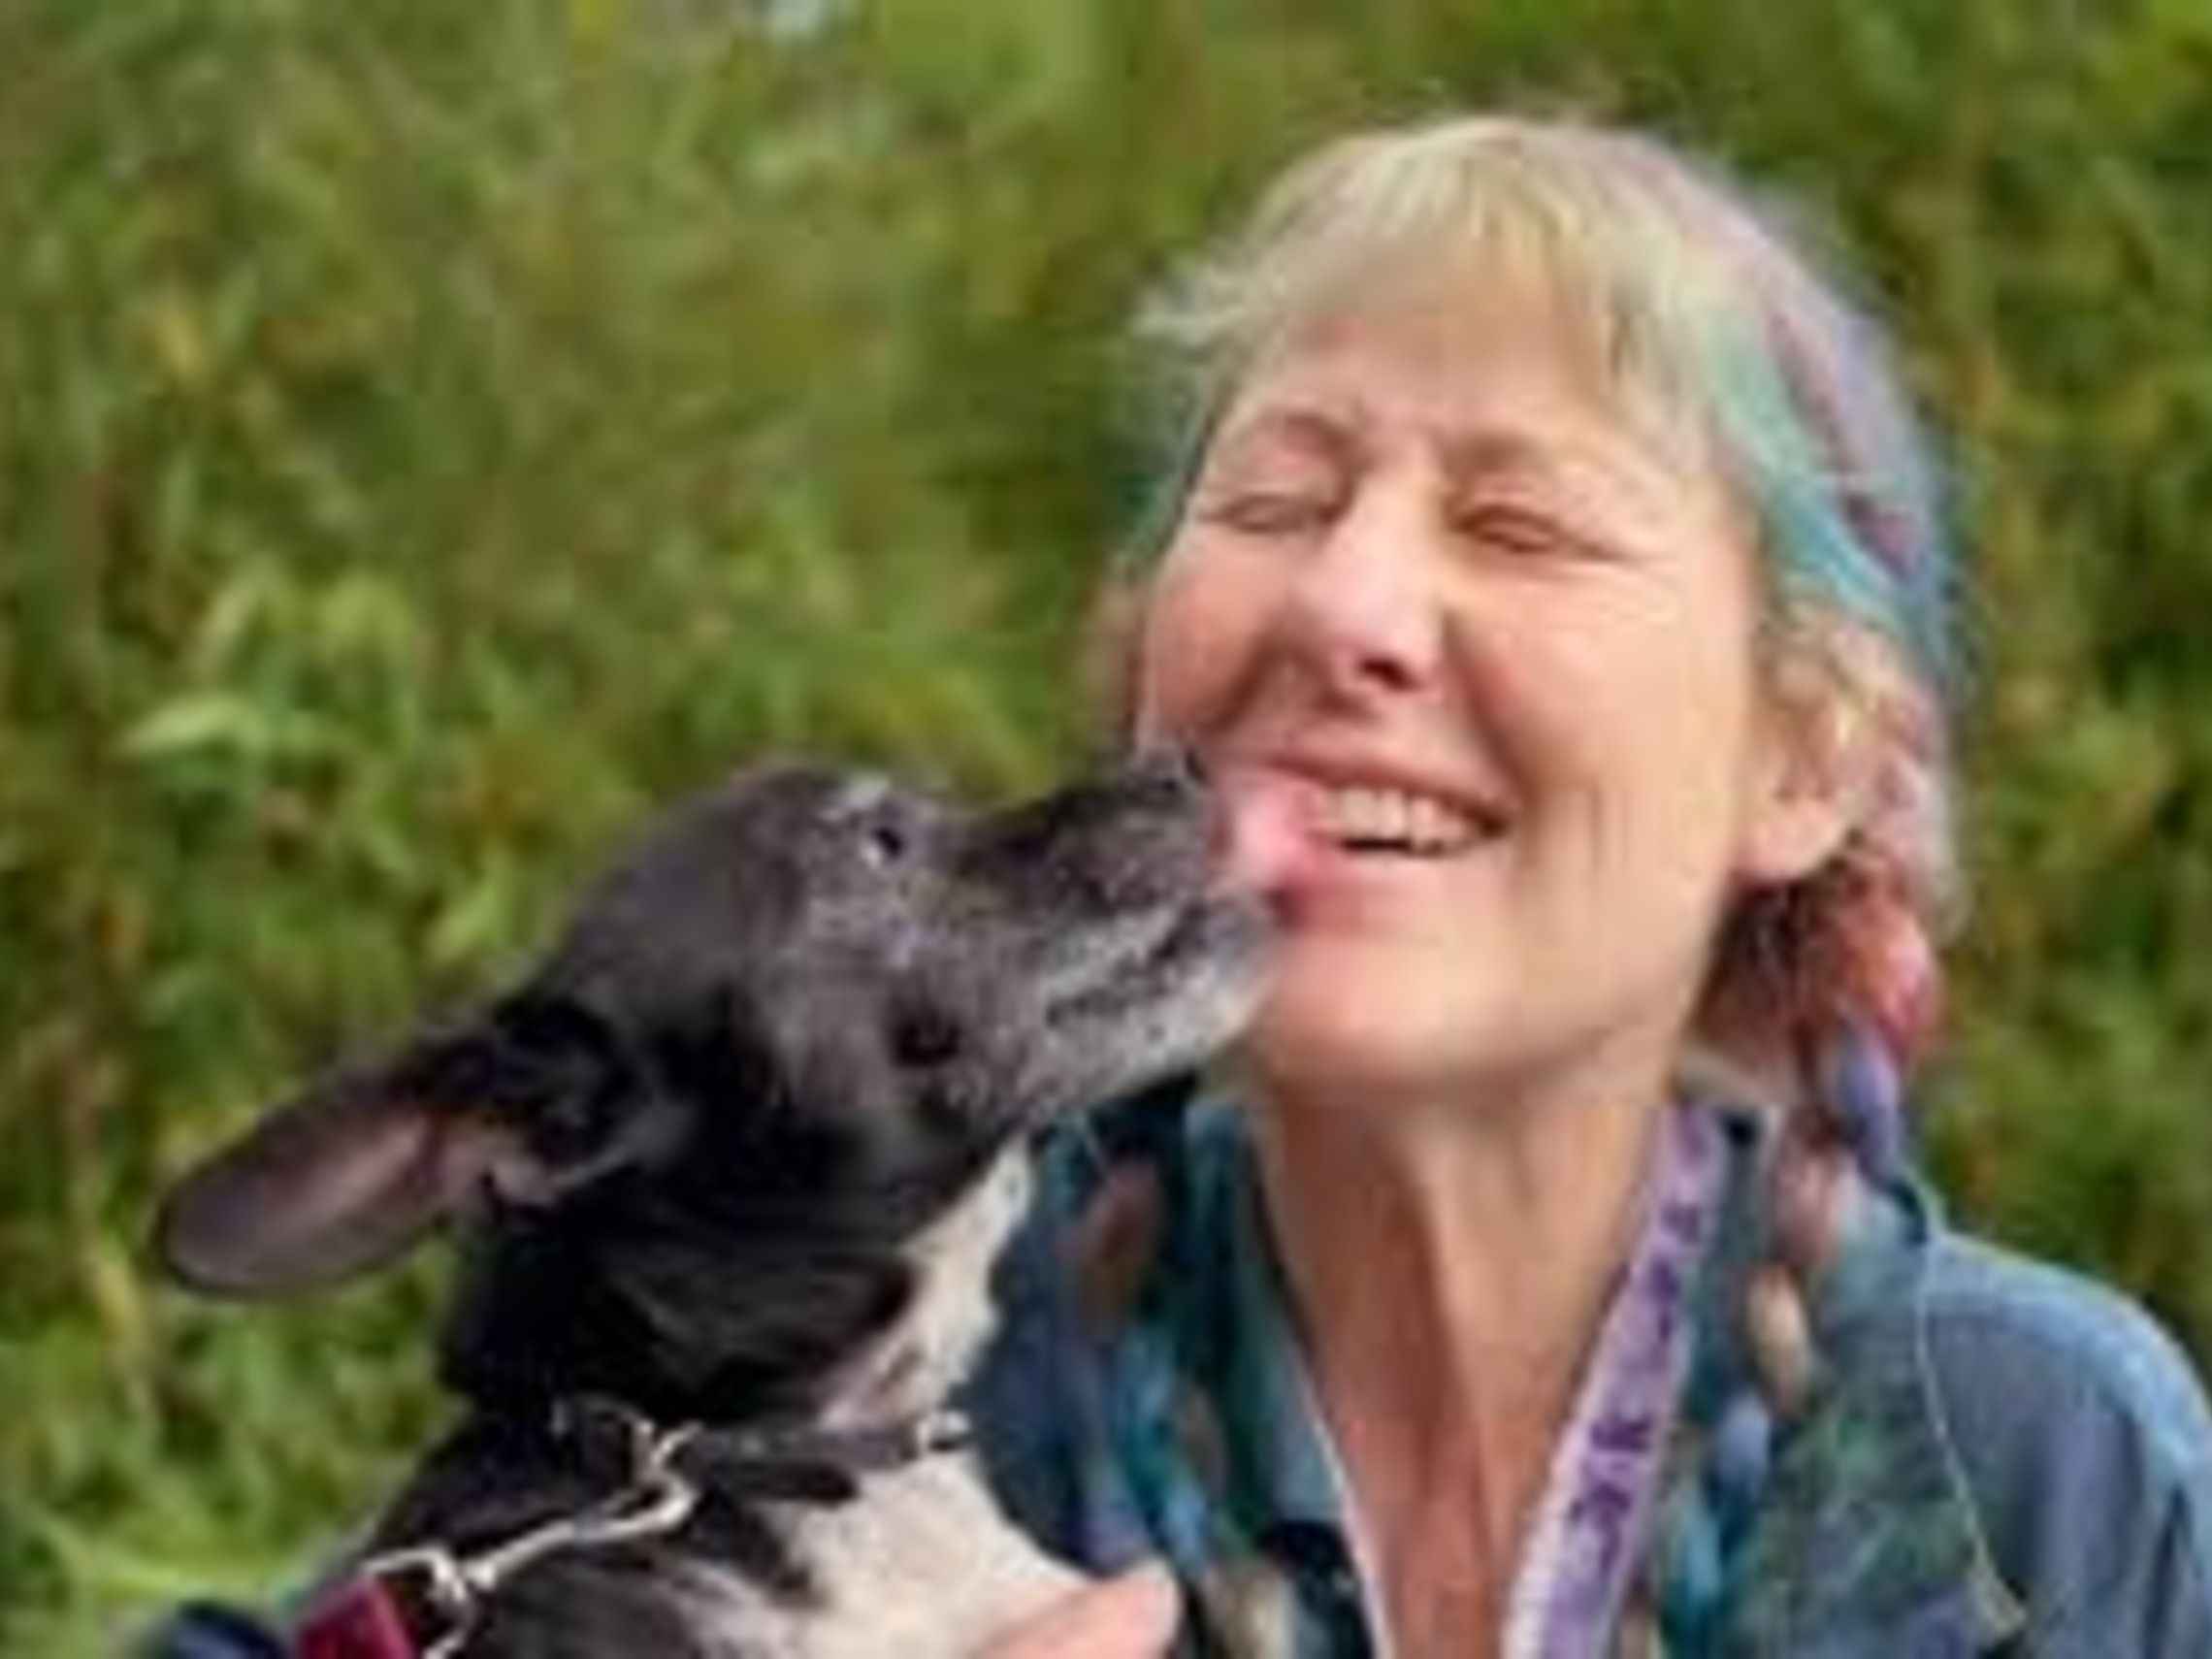 Dog licking face of woman